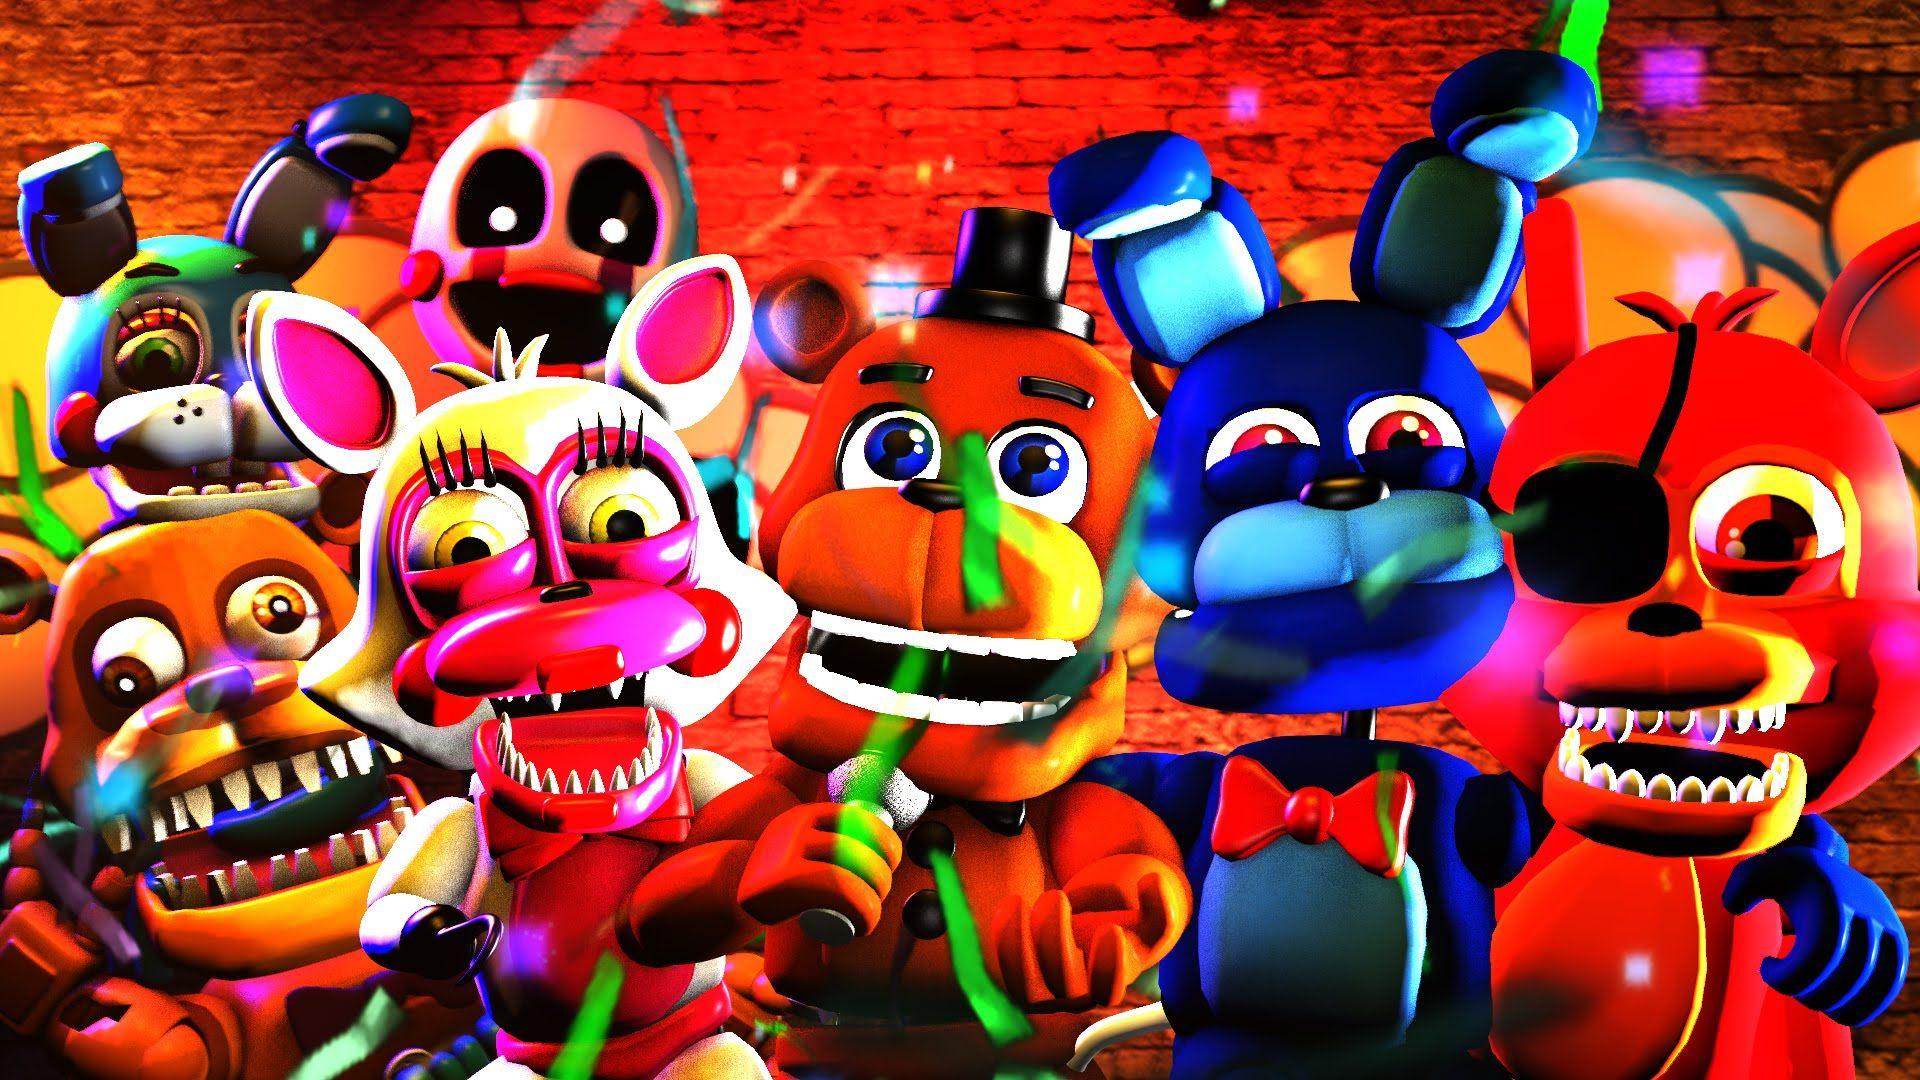 Songs in CUTE FNAF WORLD ANIMATION COMPILATION SFM Youtube.